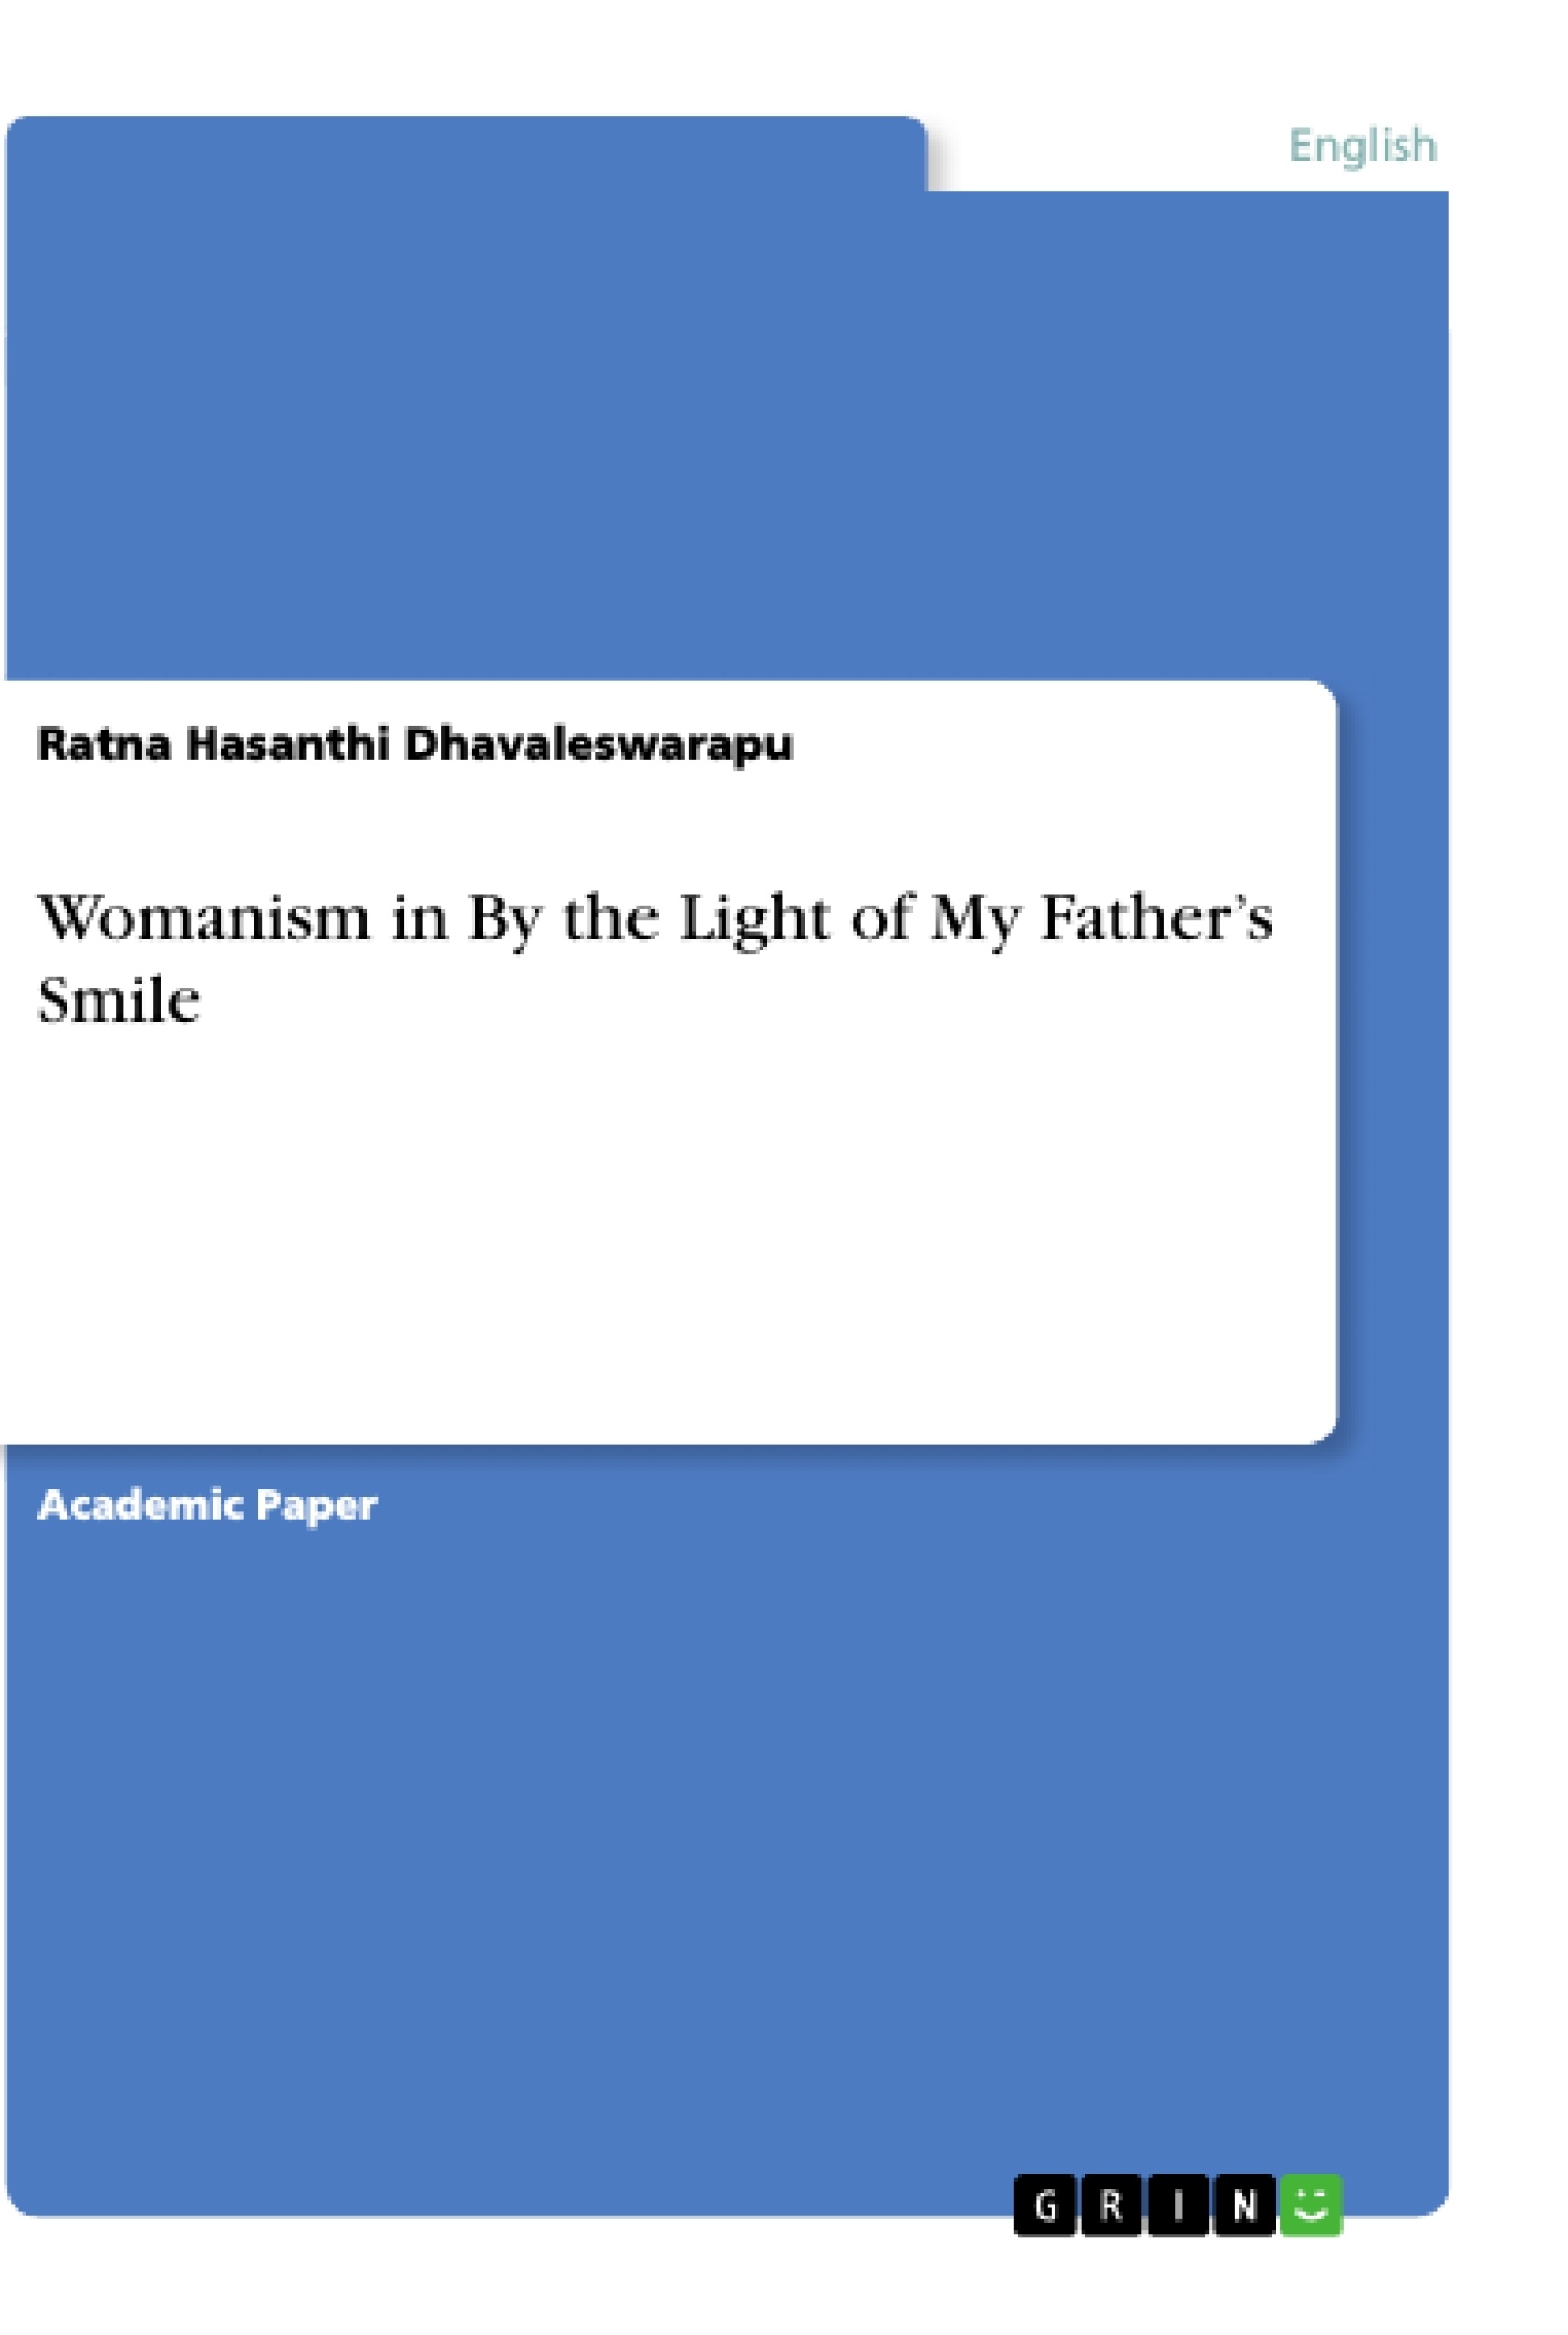 Title: Womanism in By the Light of My Father’s Smile